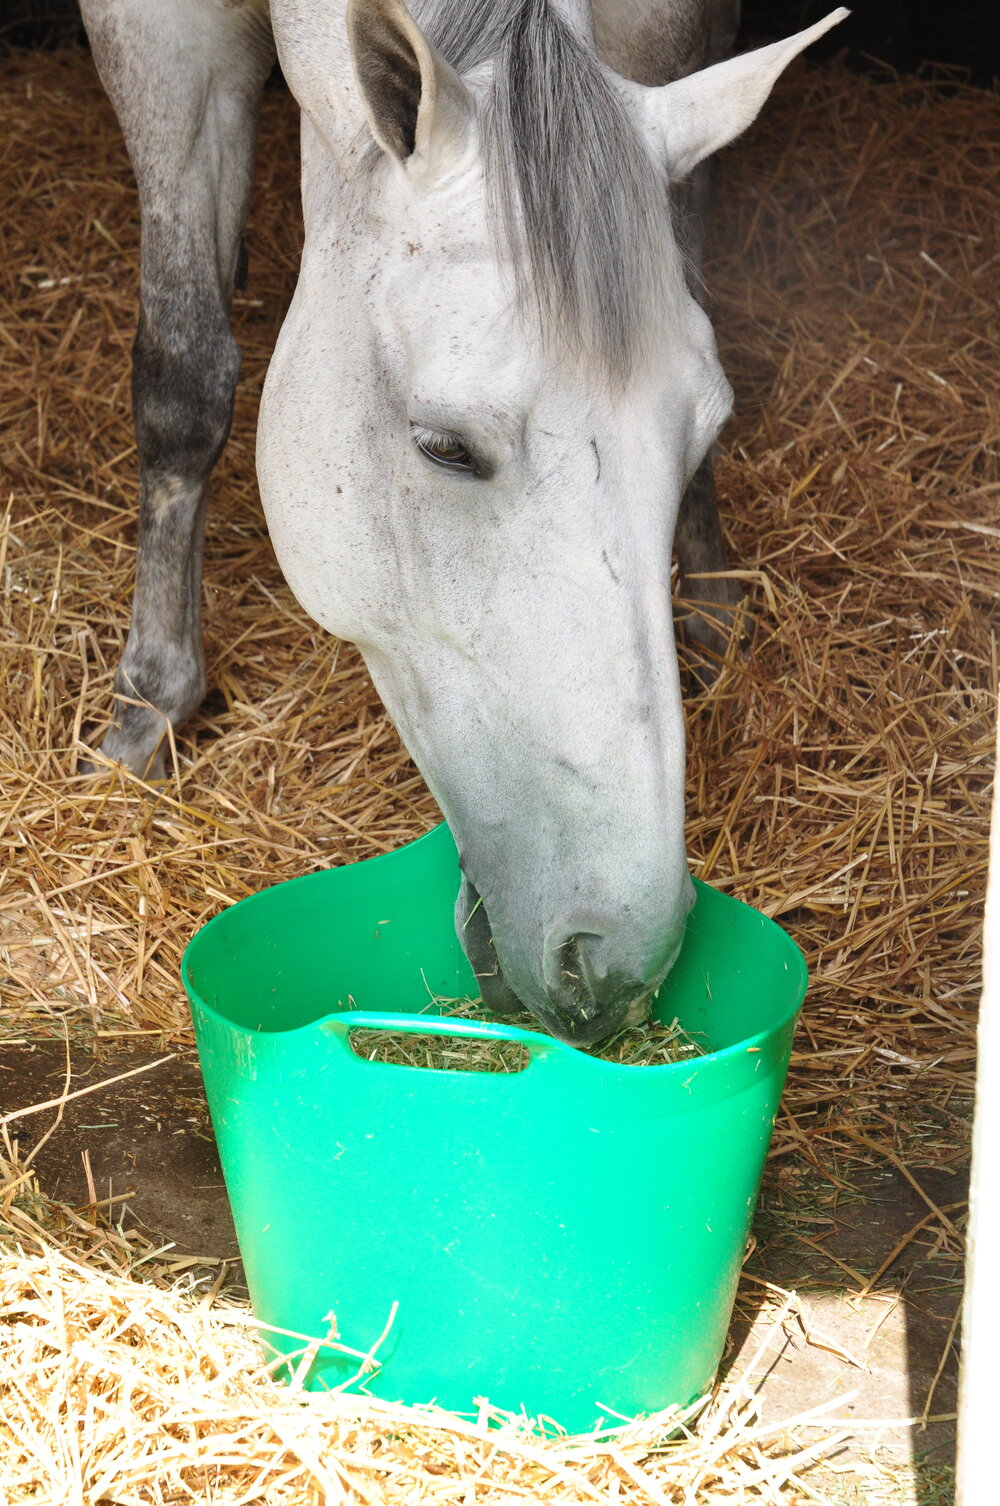 What Types Of Straw Can Be Fed to Horses - Dengie